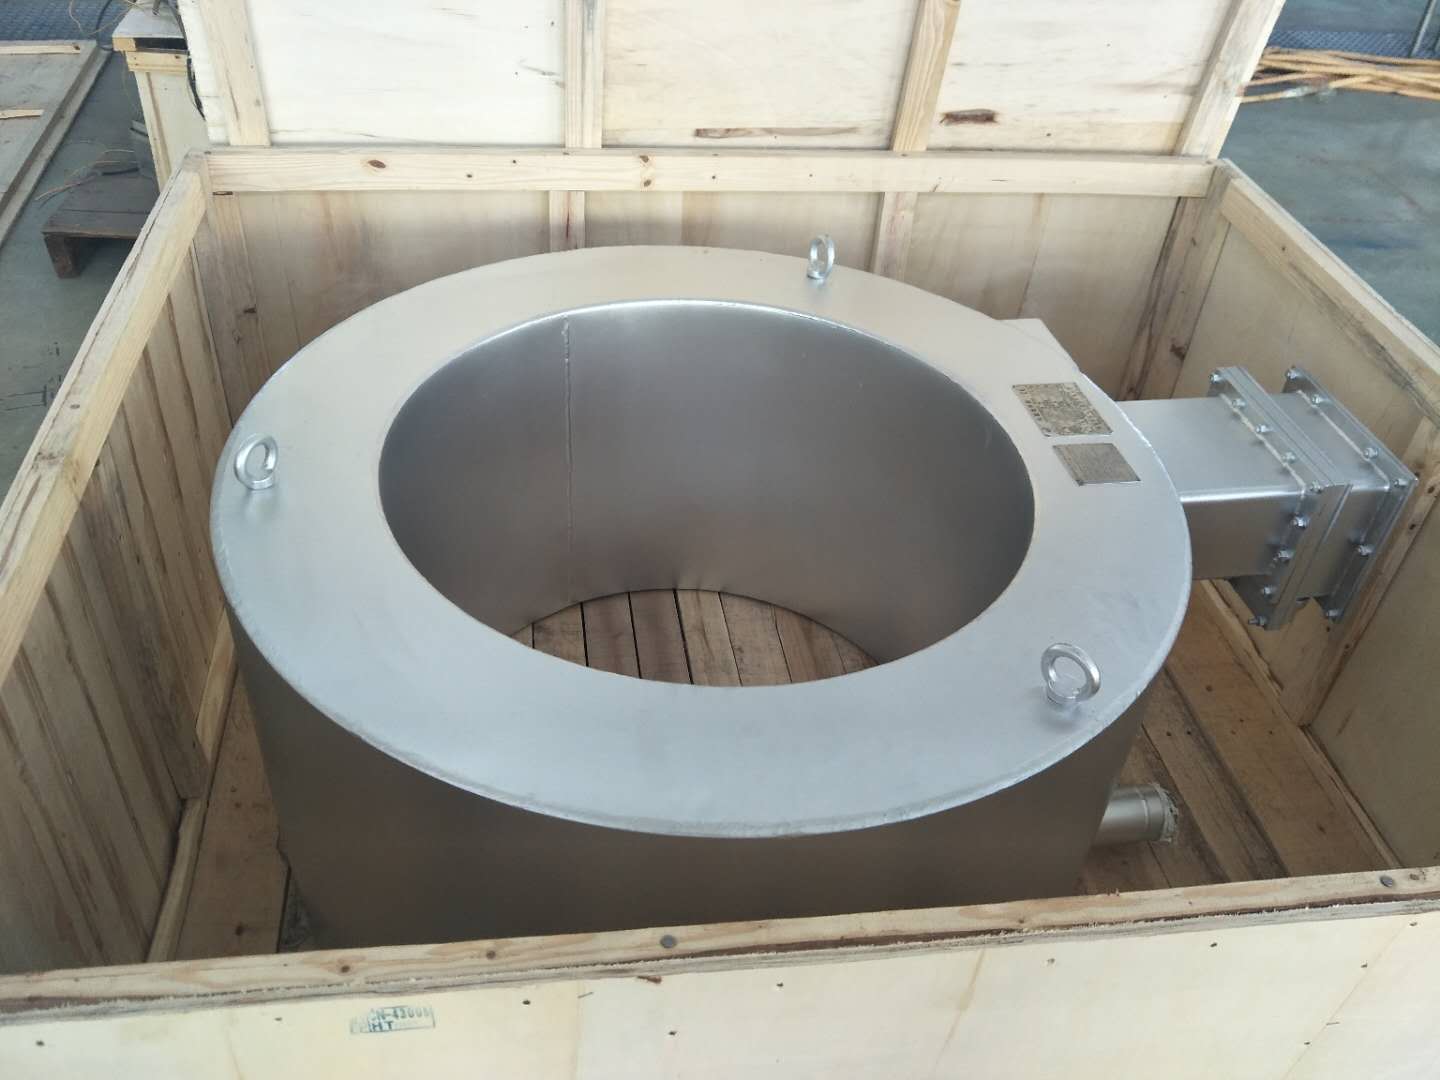 Mold Electromagnetic Stirrer(M-EMS) for Continuous Casting Machine(CCM)